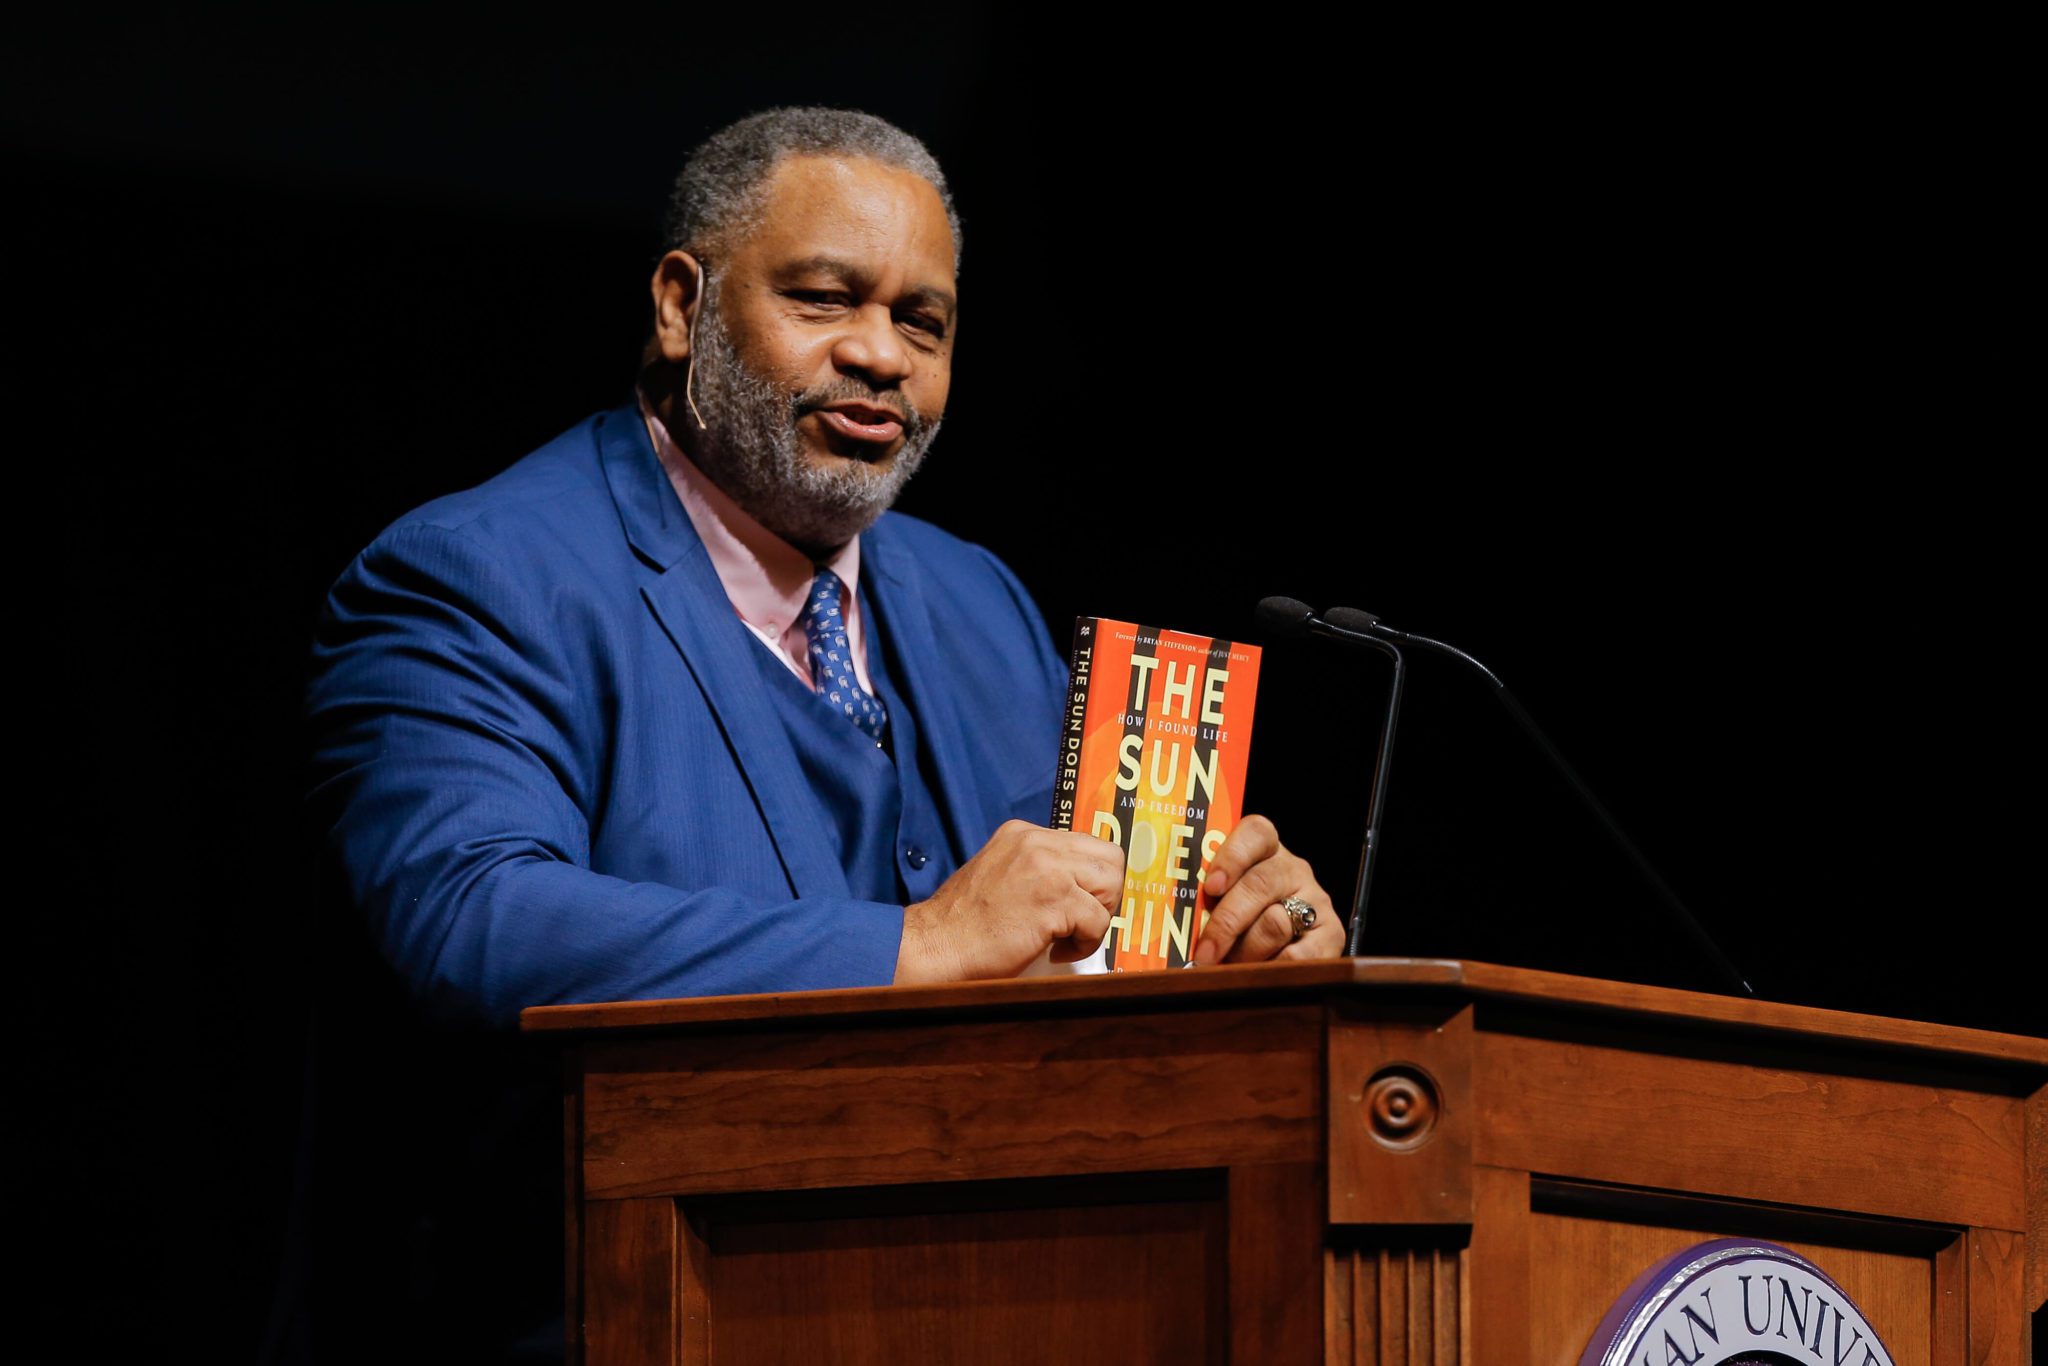 Speaker Anthony Ray Hinton stands behind podium